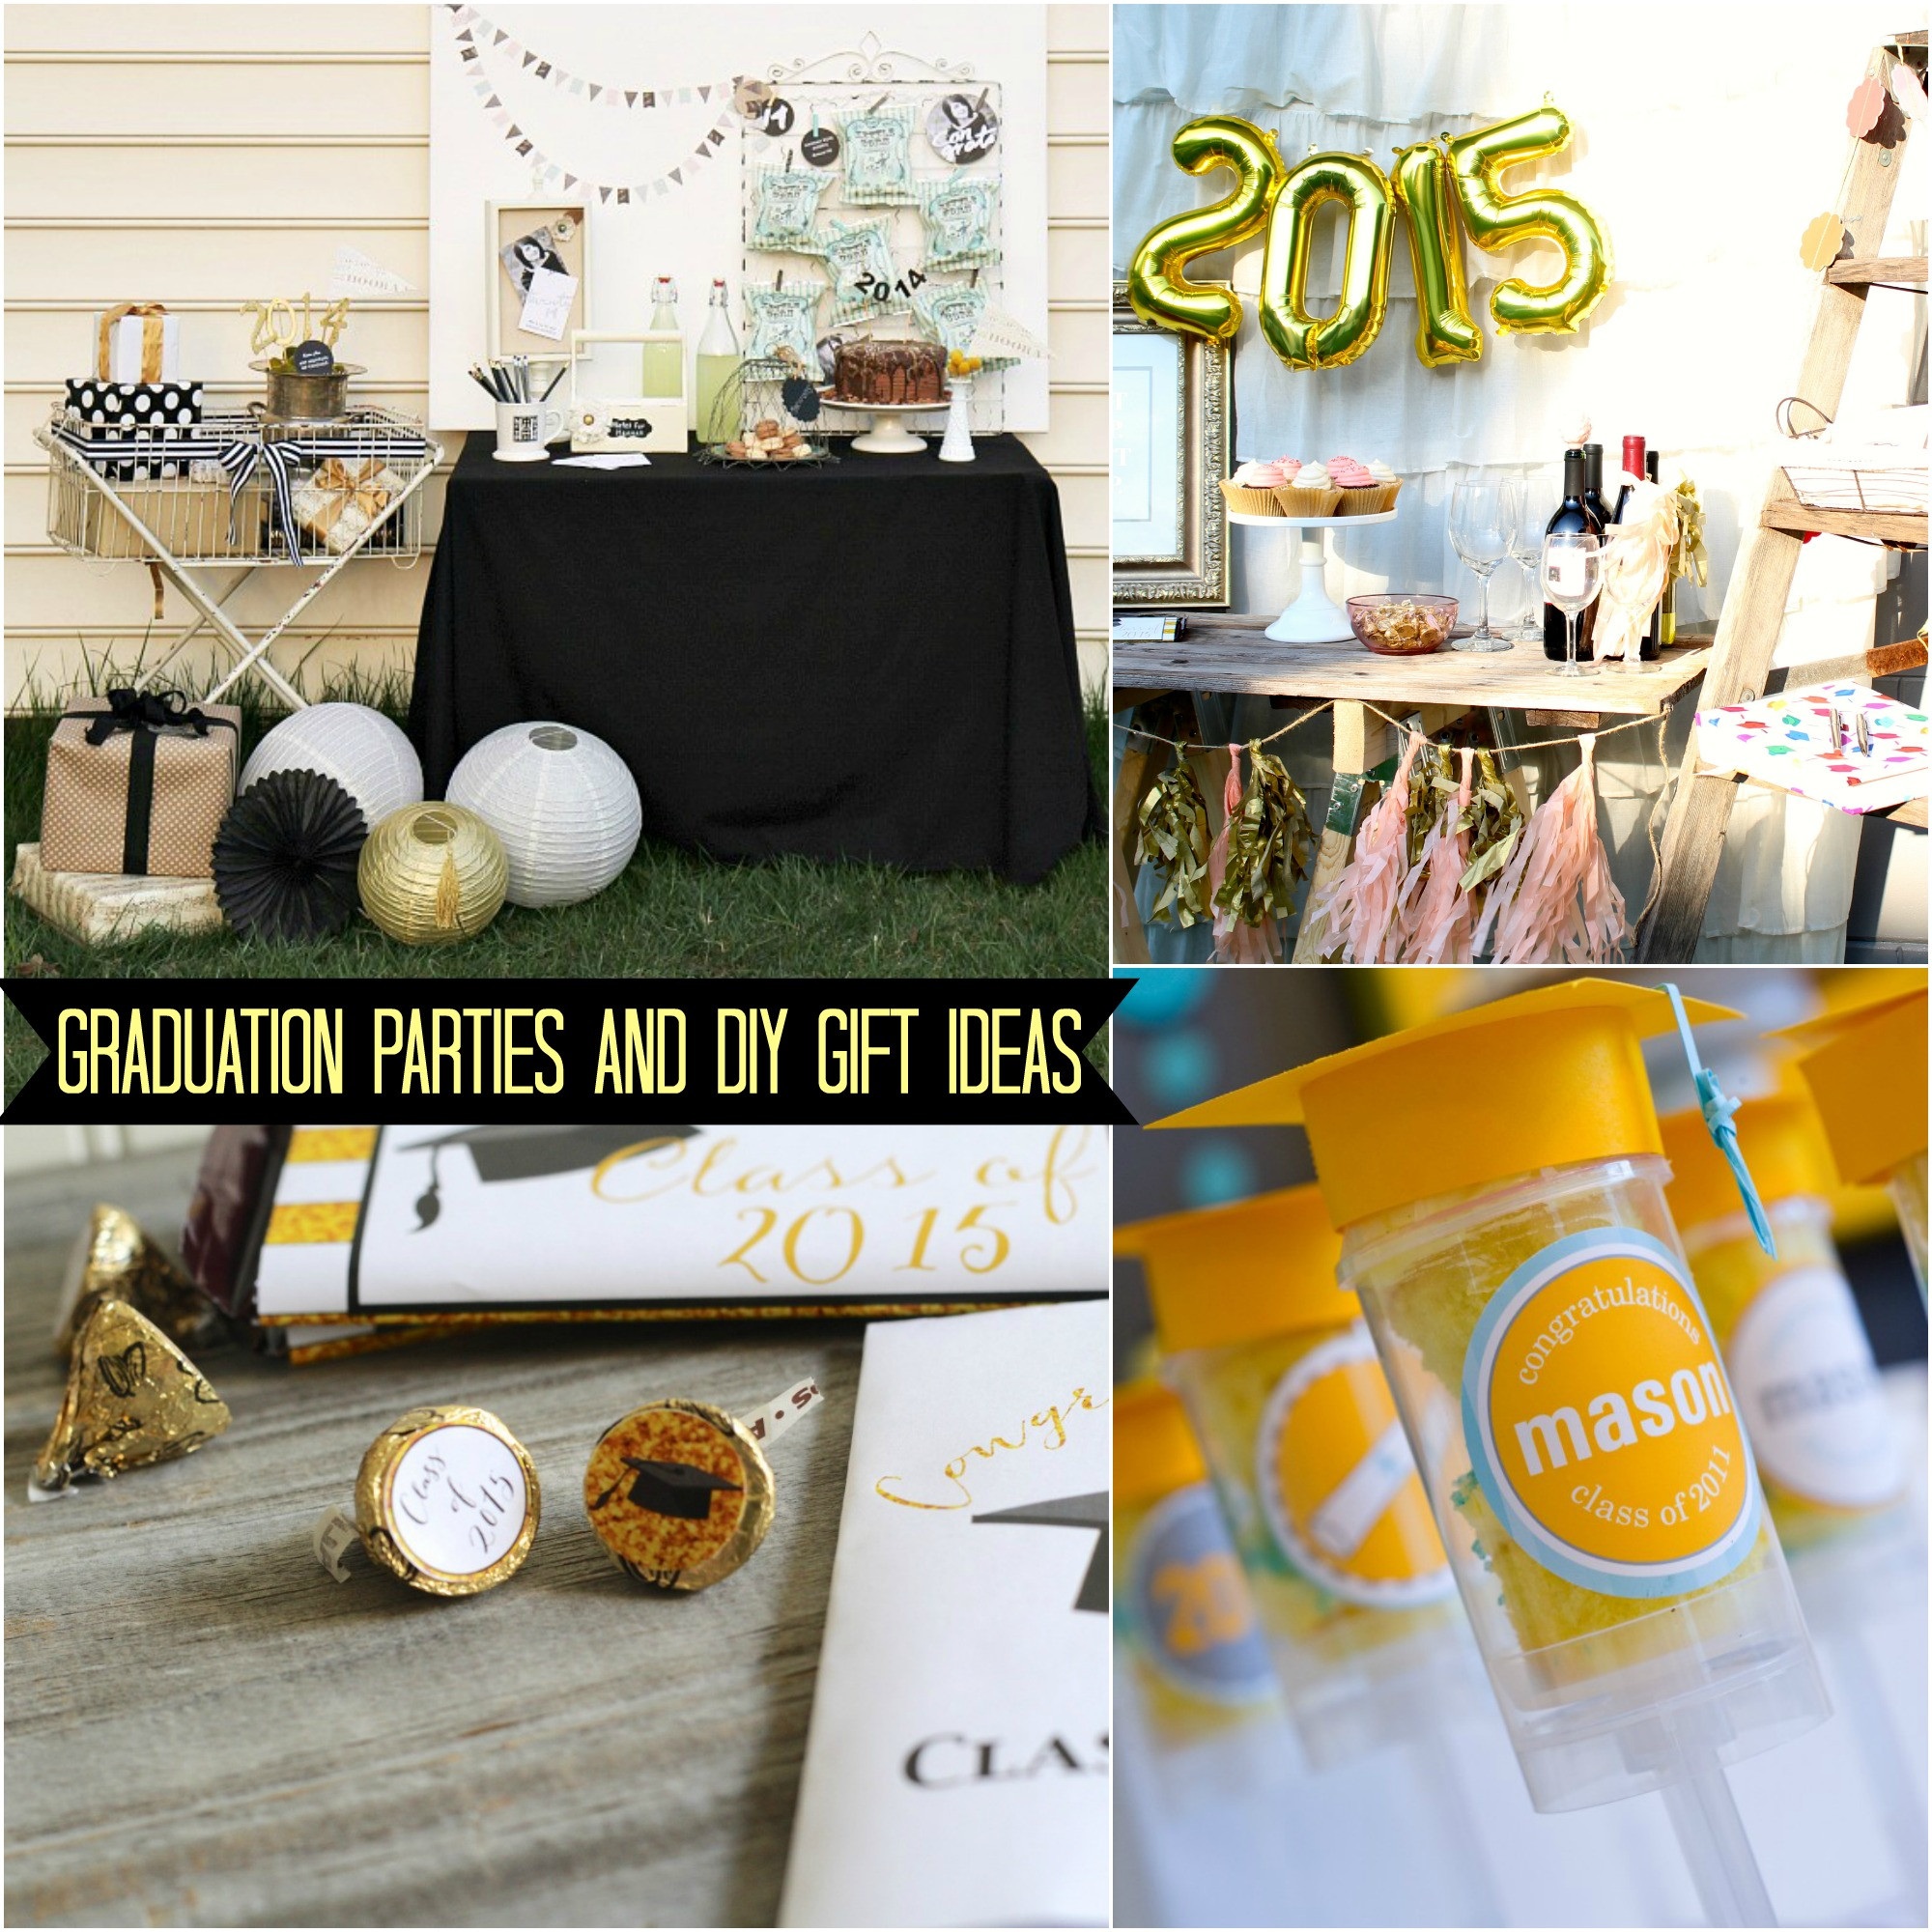 Gift Ideas For Graduation Party
 Graduation Parties and DIY Gift Ideas